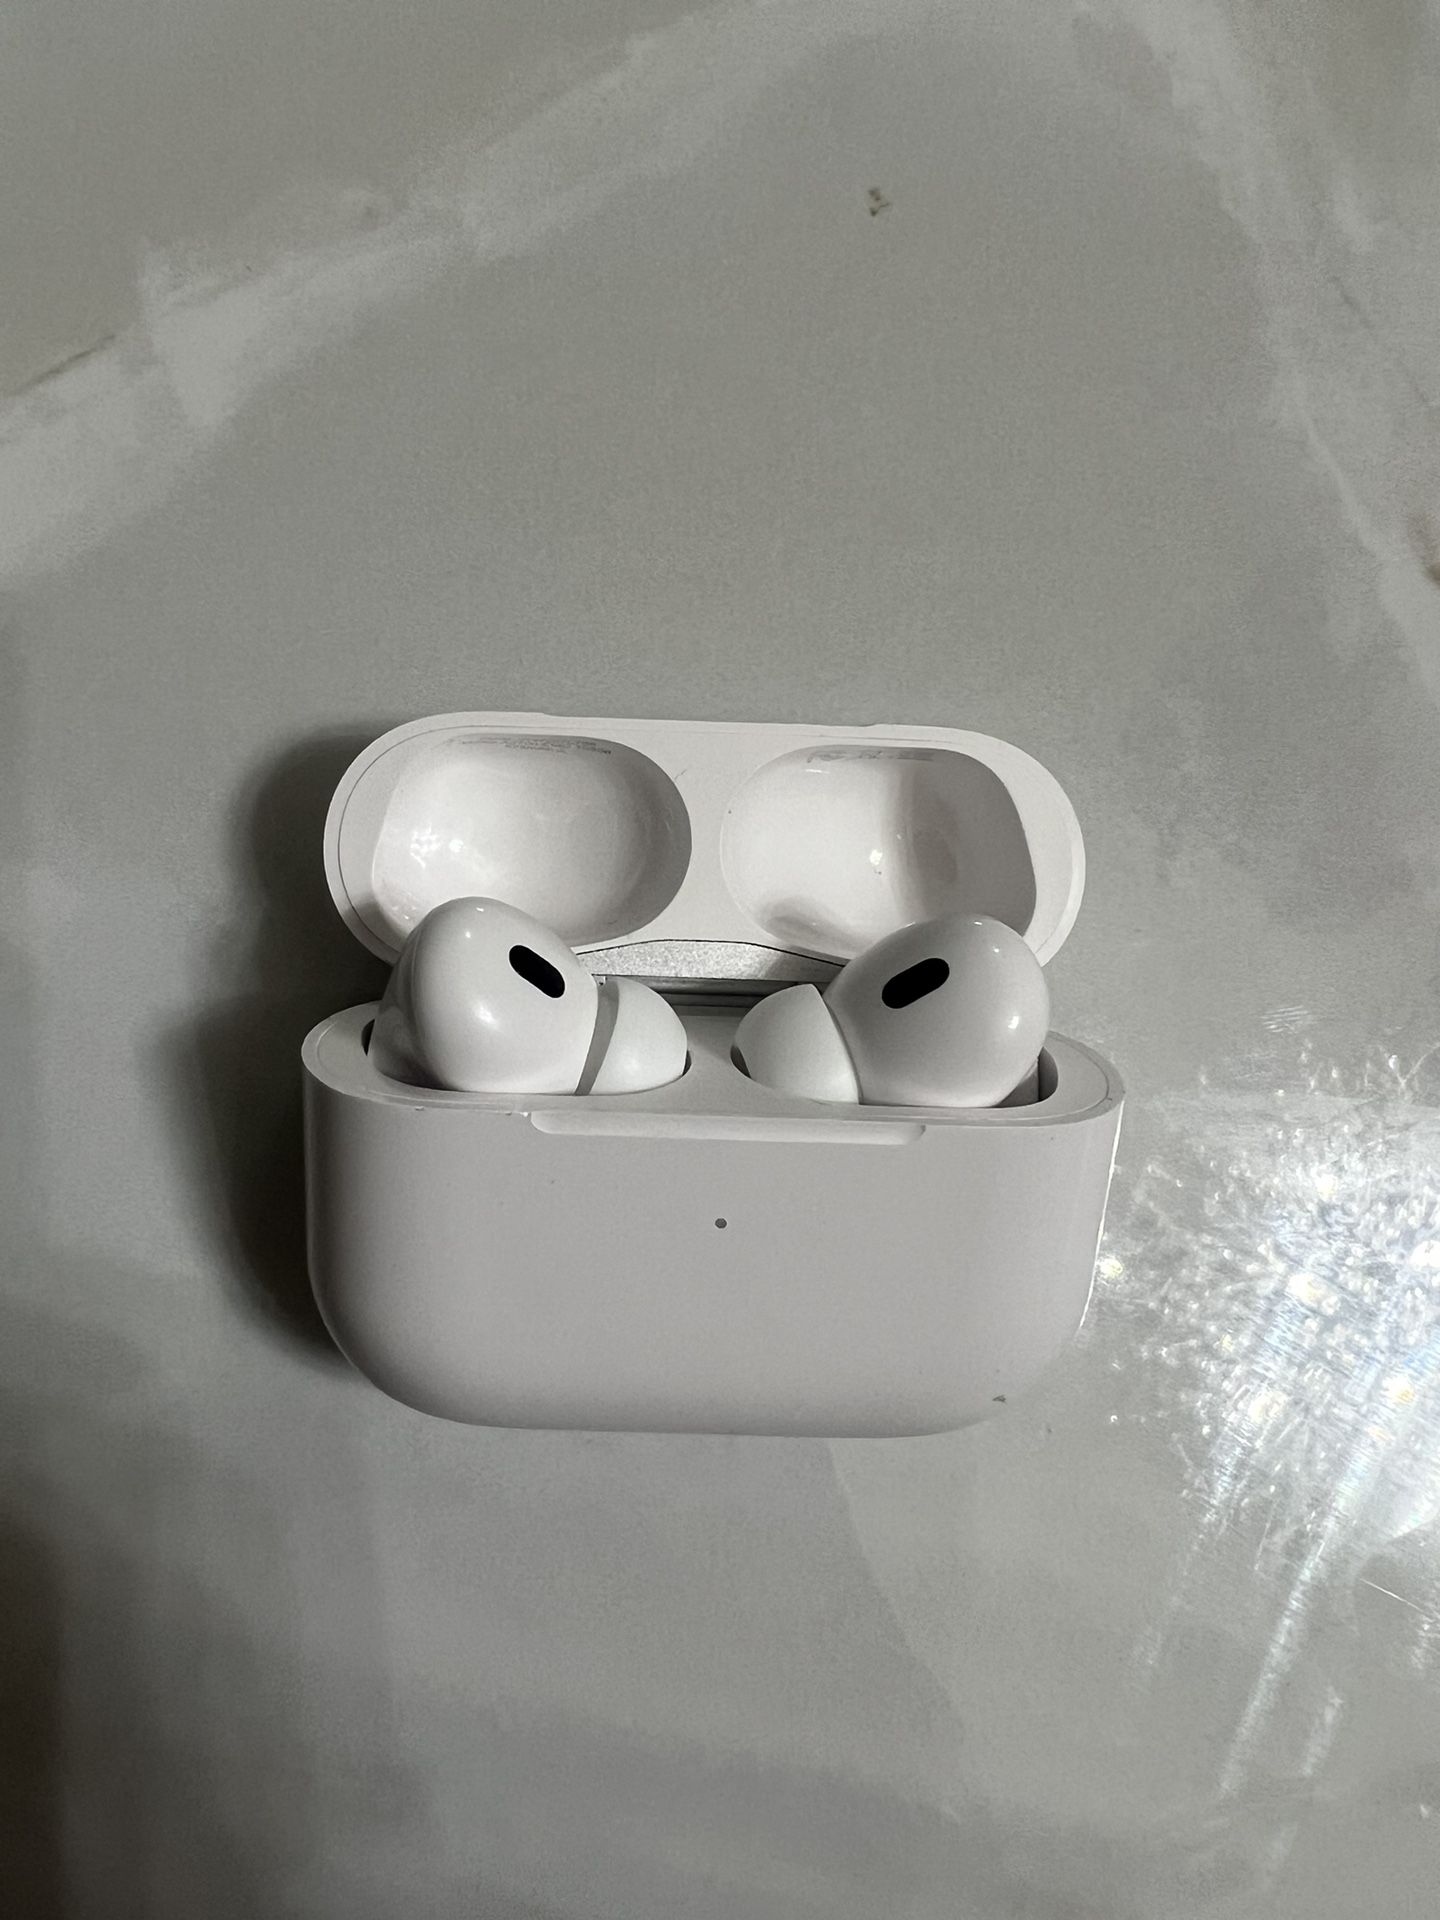 Airpods Pro Generation 2 (2nd Generation) With MagSafe Wireless Charging Case